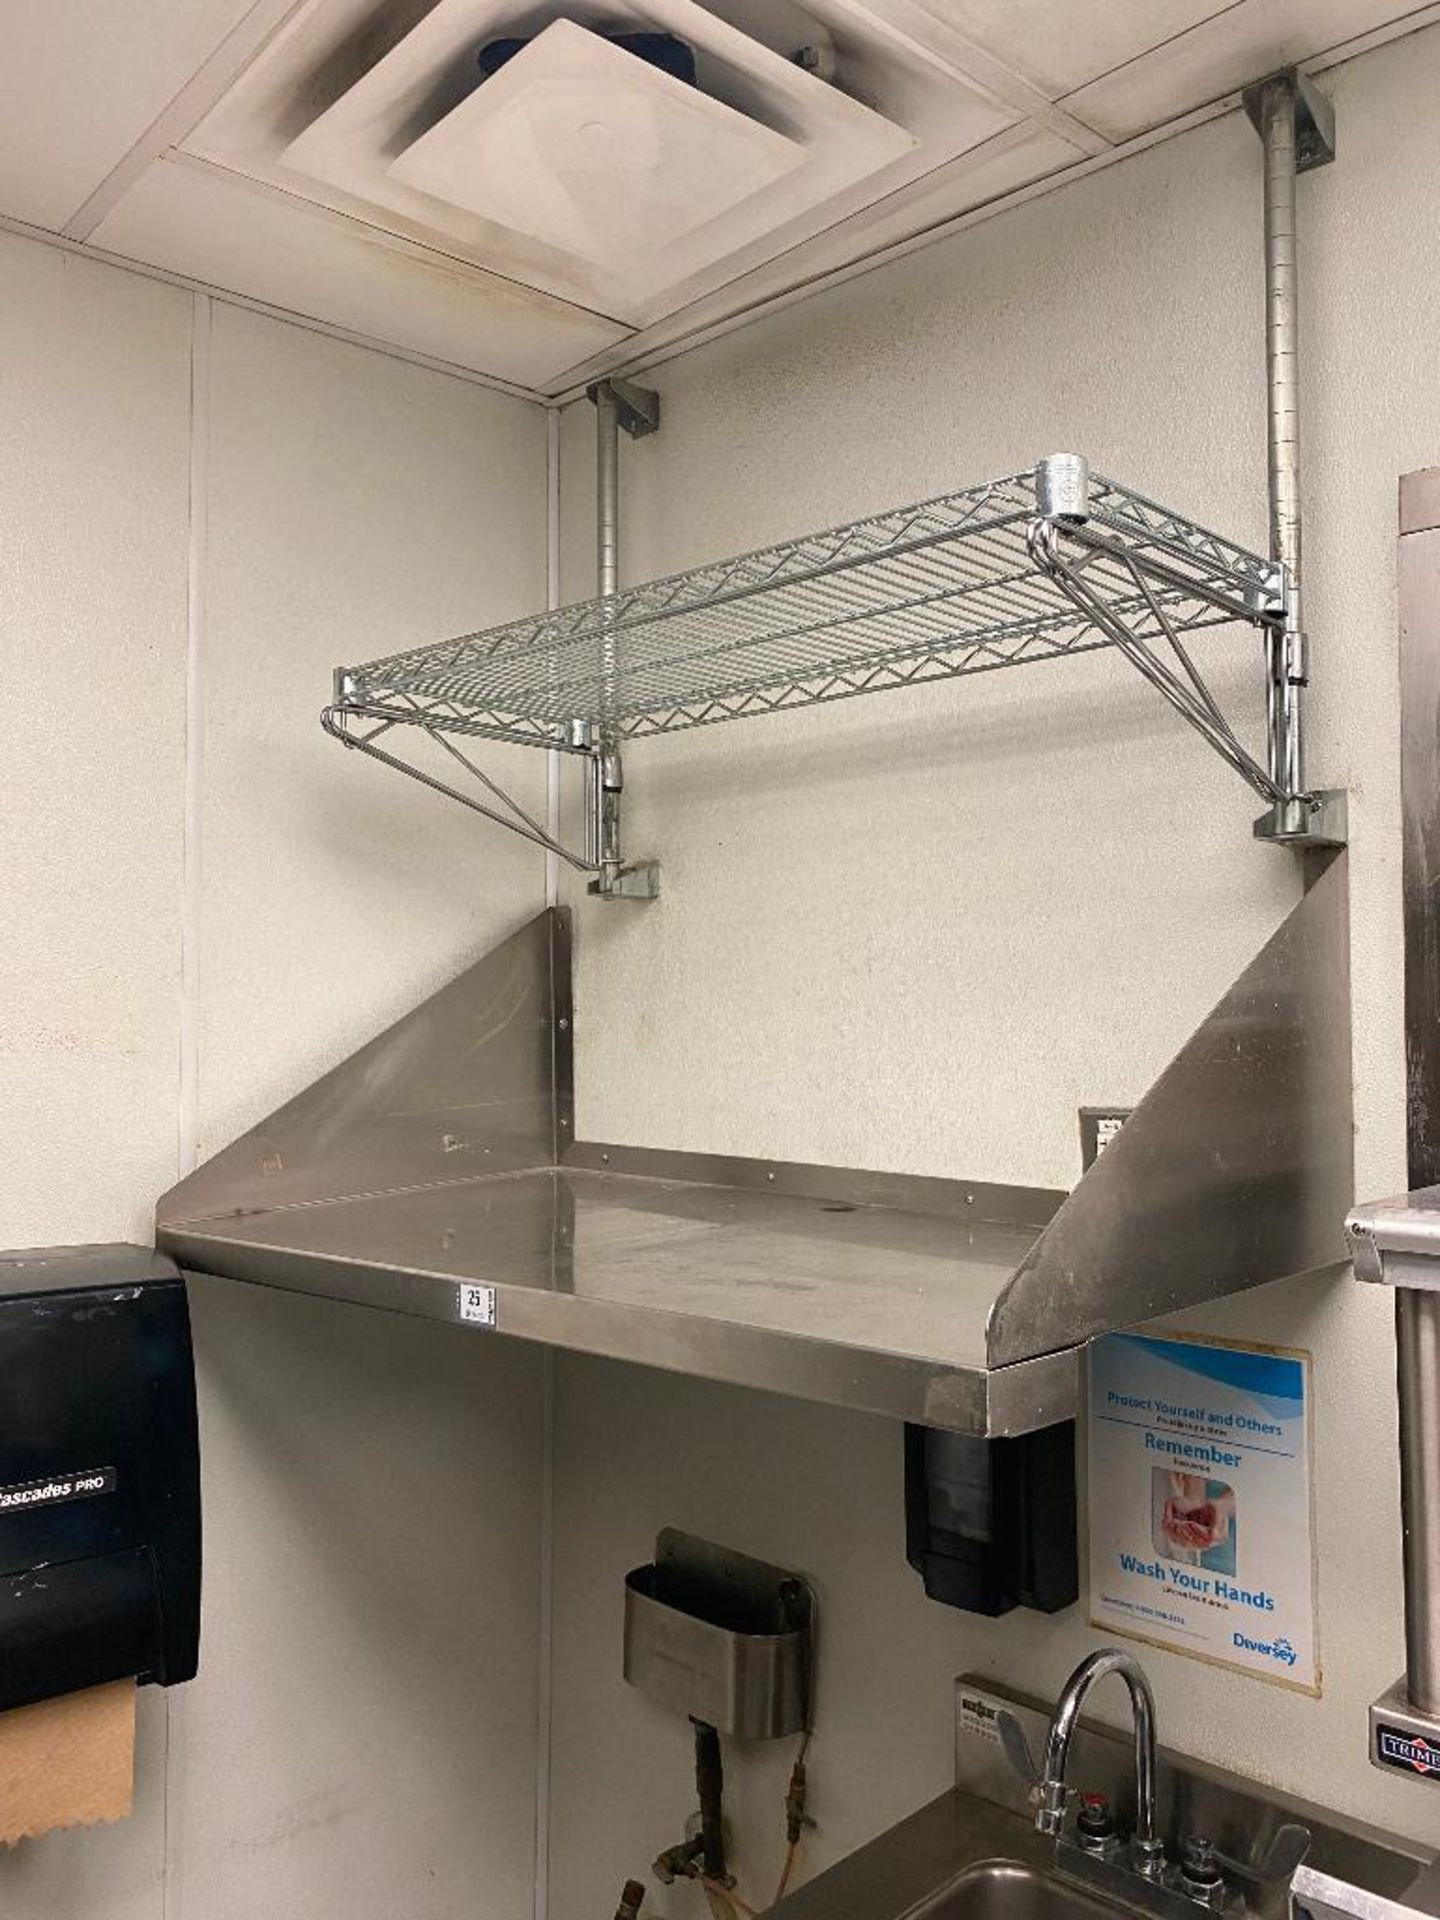 42" X 22" STAINLESS STEEL WALL SHELF & 35" X 15" CHROME WIRE SHELF - NOTE: REQUIRES REMOVAL FROM WAL - Image 2 of 5